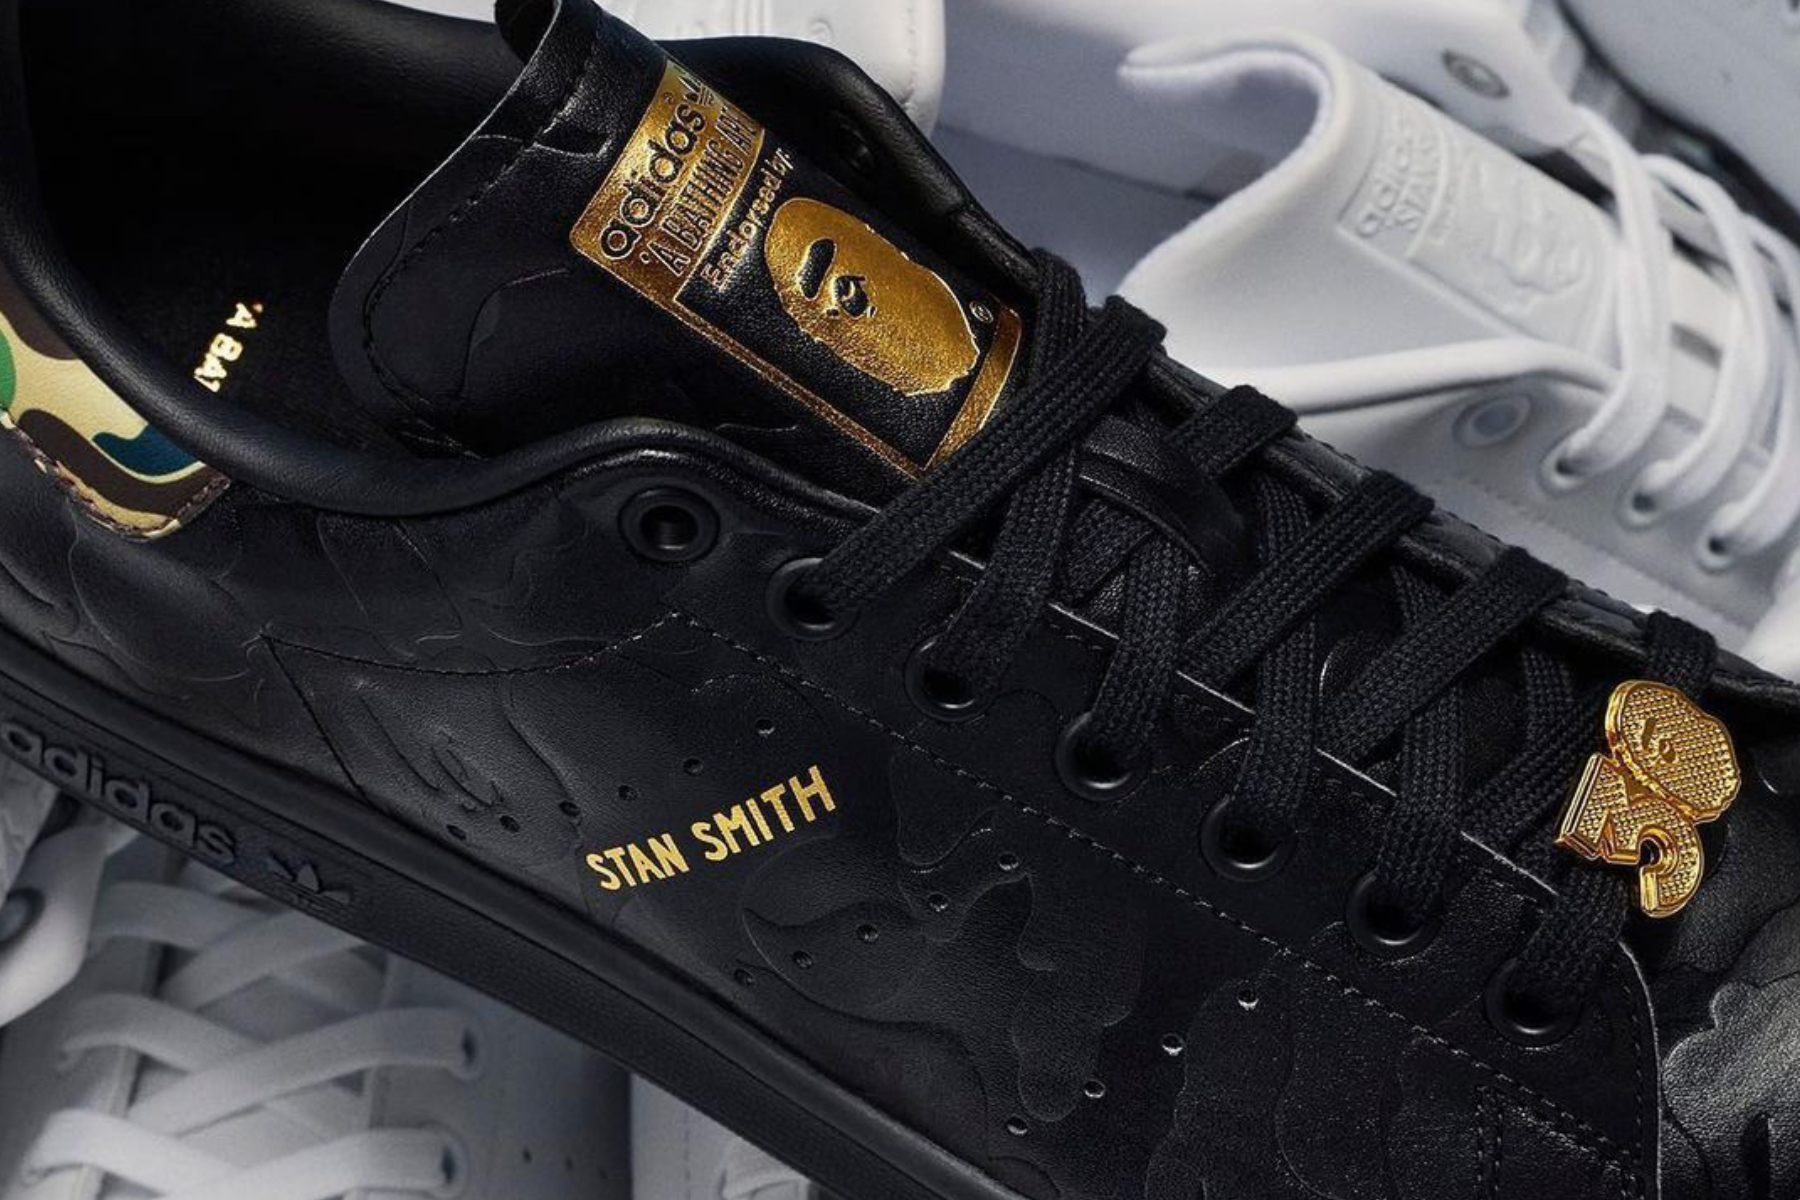 BAPE & adidas are back for Fall/Winter 2023 to drop two takes on the latter's Stan Smith silhouette, a signature silhouette from the adidas archives.